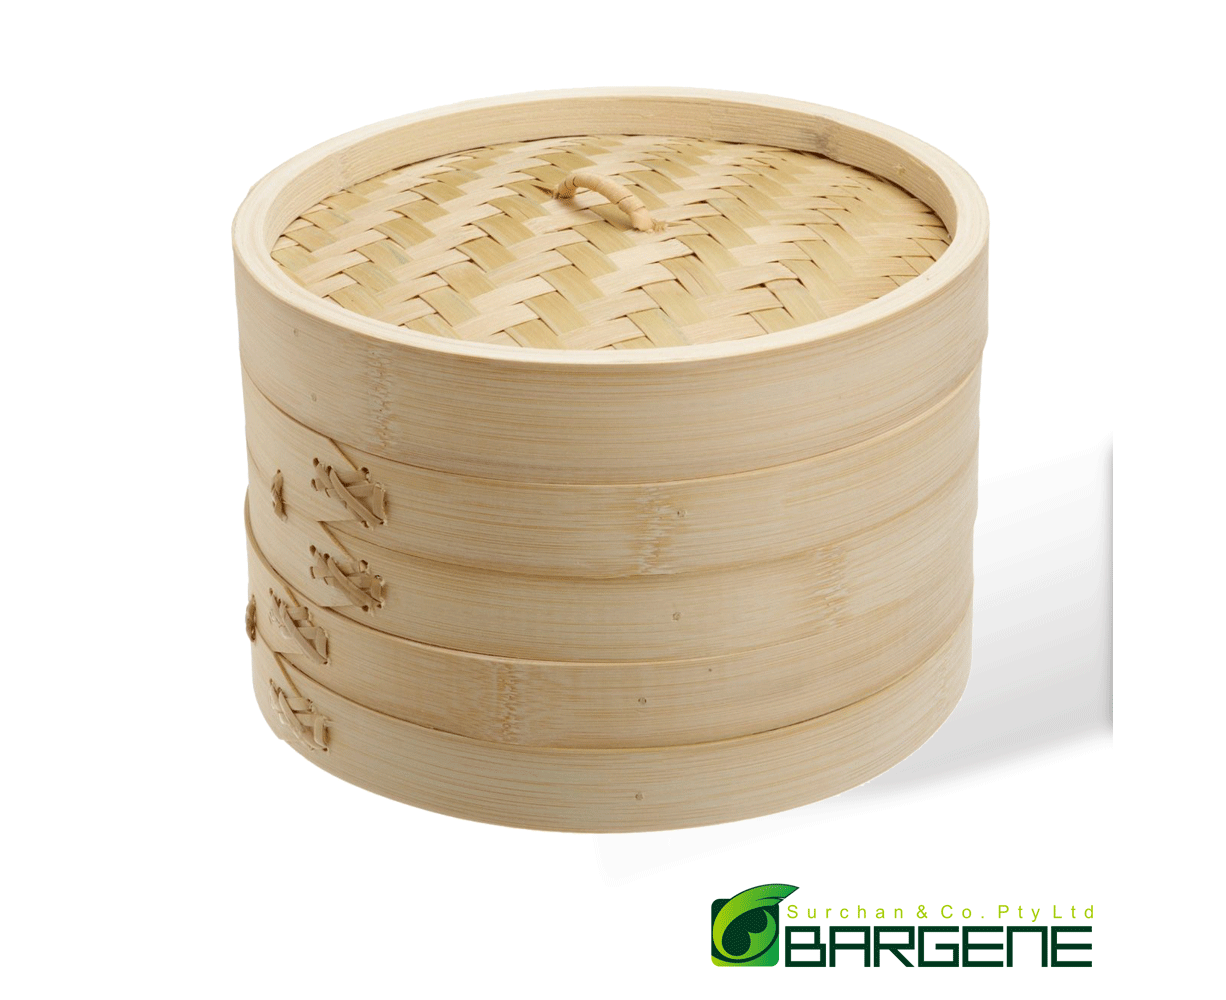 11 Inch Brand New Bamboo Steamer Set - 2 Steamer Baskets With 1 Lid